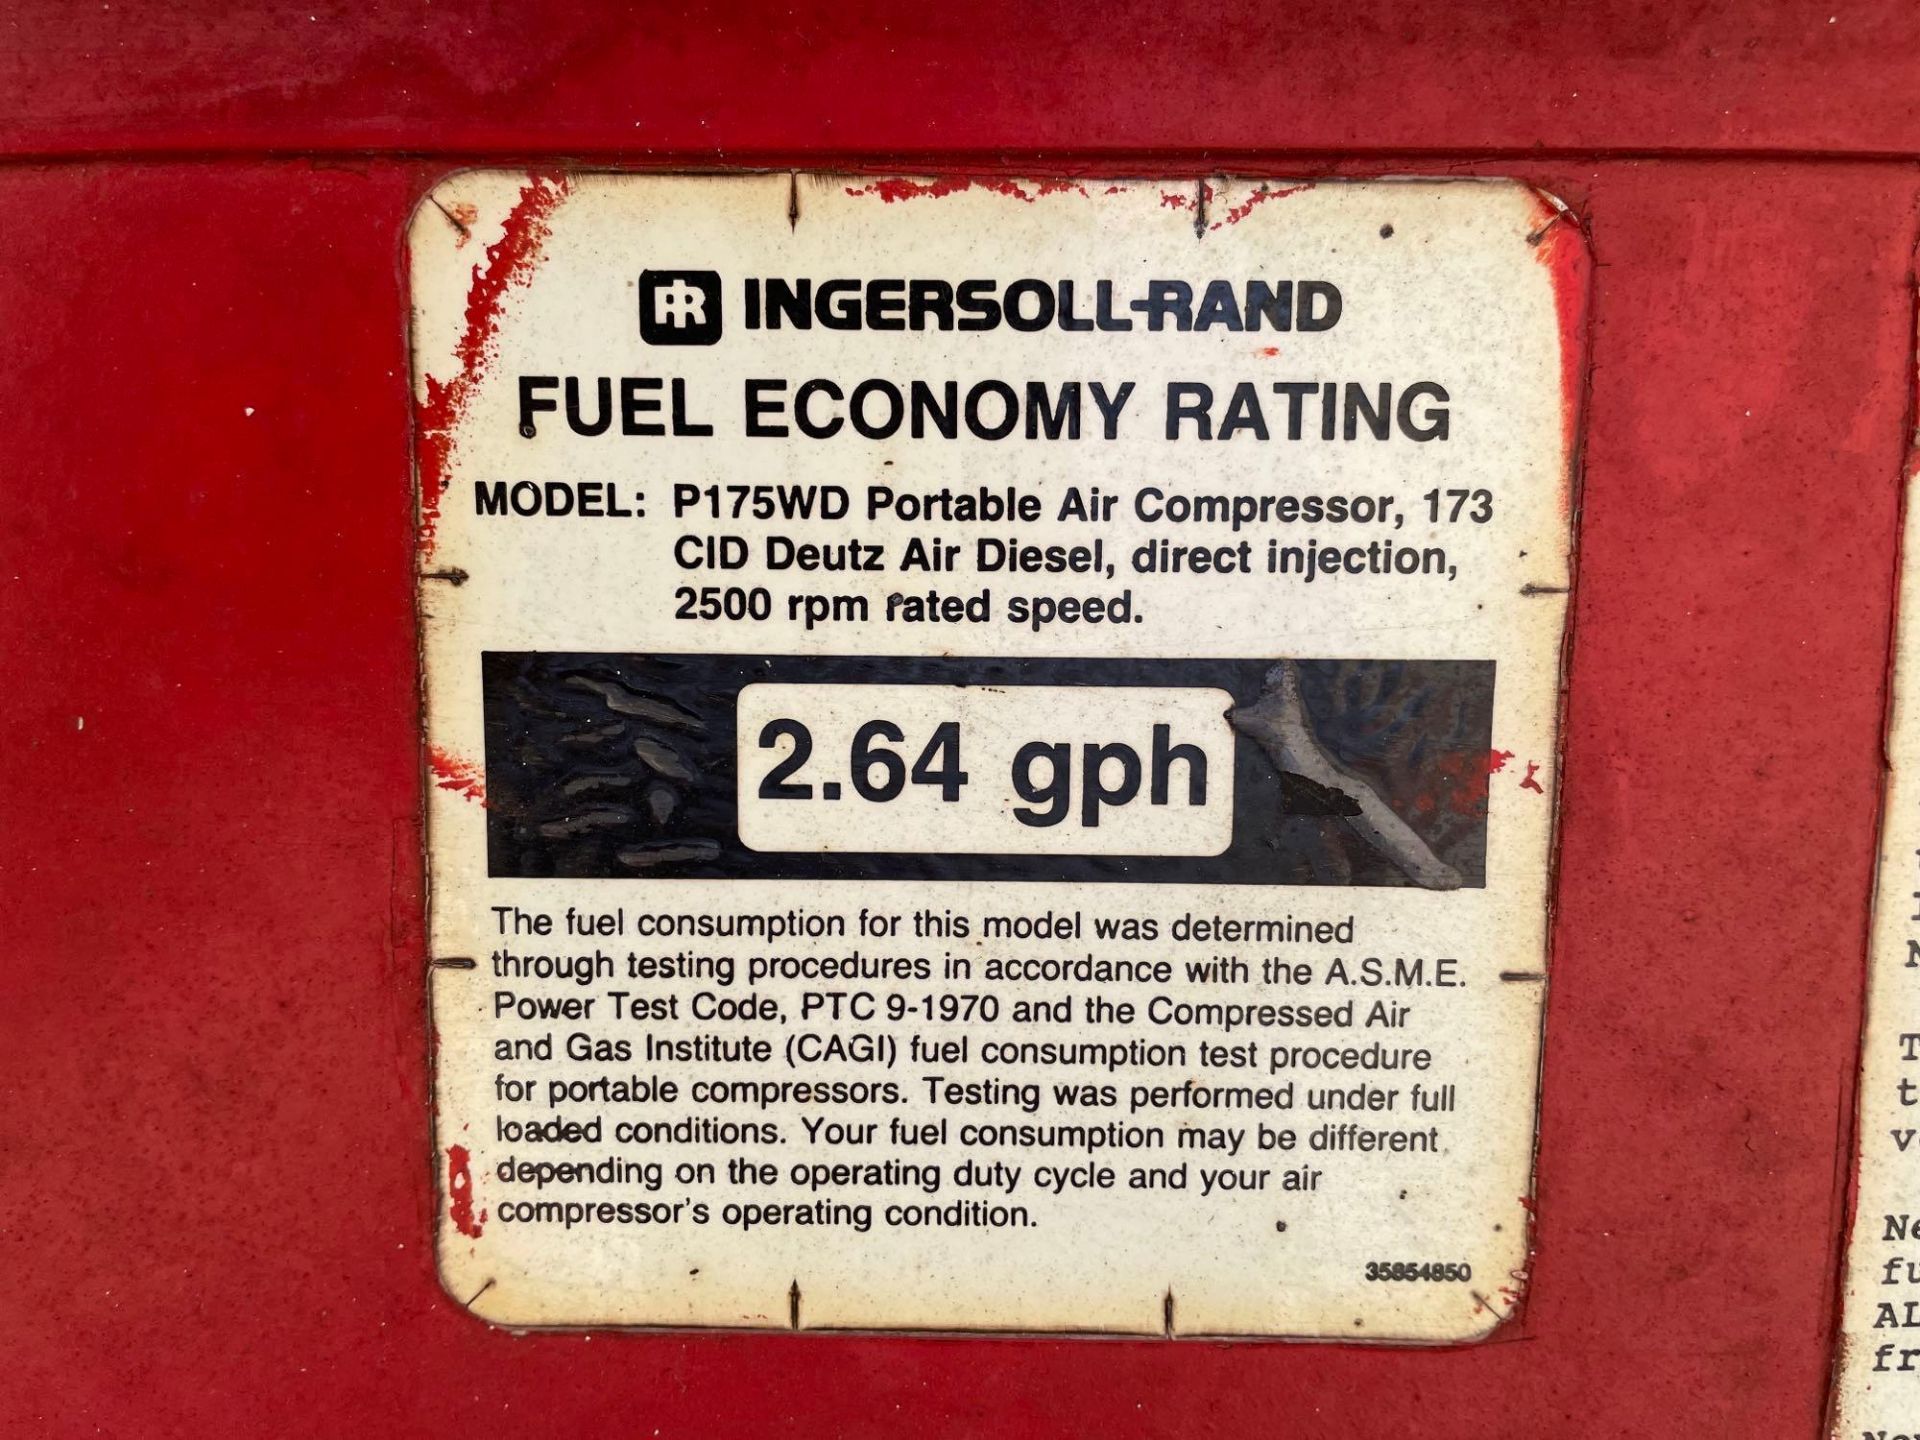 Ingersoll Rand Portable Air Compressor with Diesel Engine - Image 10 of 17